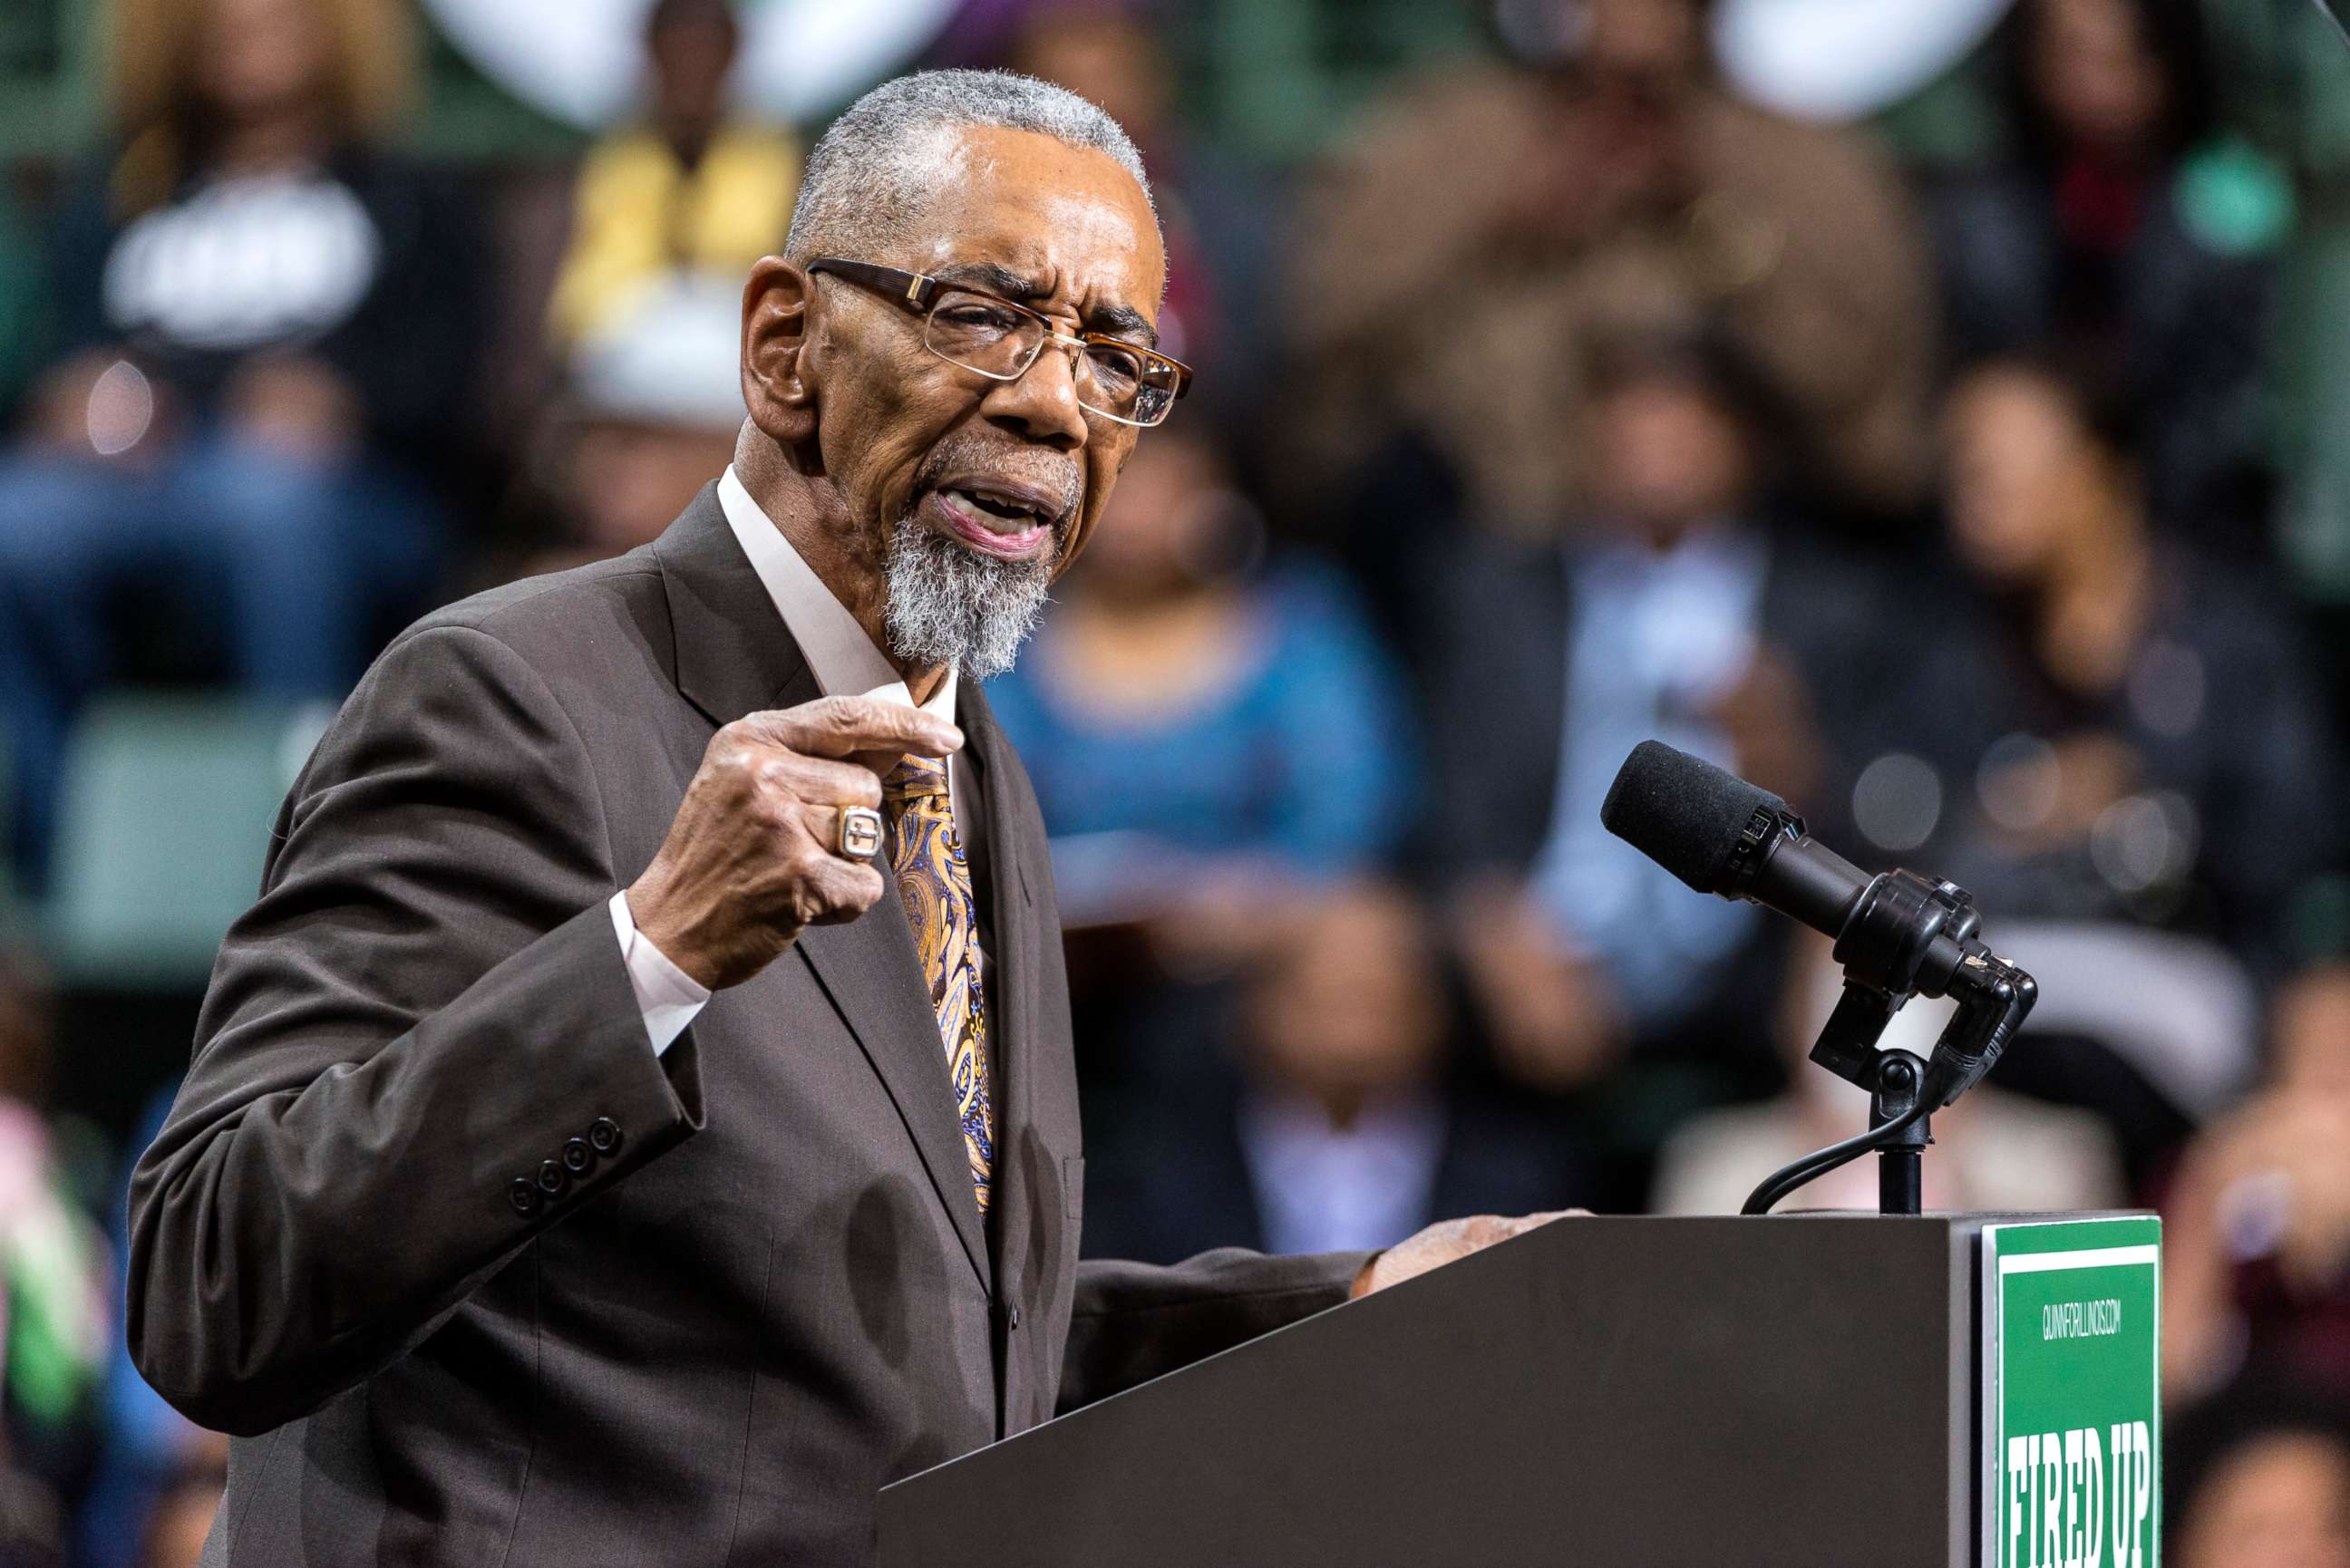 PHOTO: Congressman Bobby Rush speaks to the crowd at a rally for Illinois Governor Pat Quinn at the Chicago State University Convocation Center, Oct. 19, 2014, in Chicago.